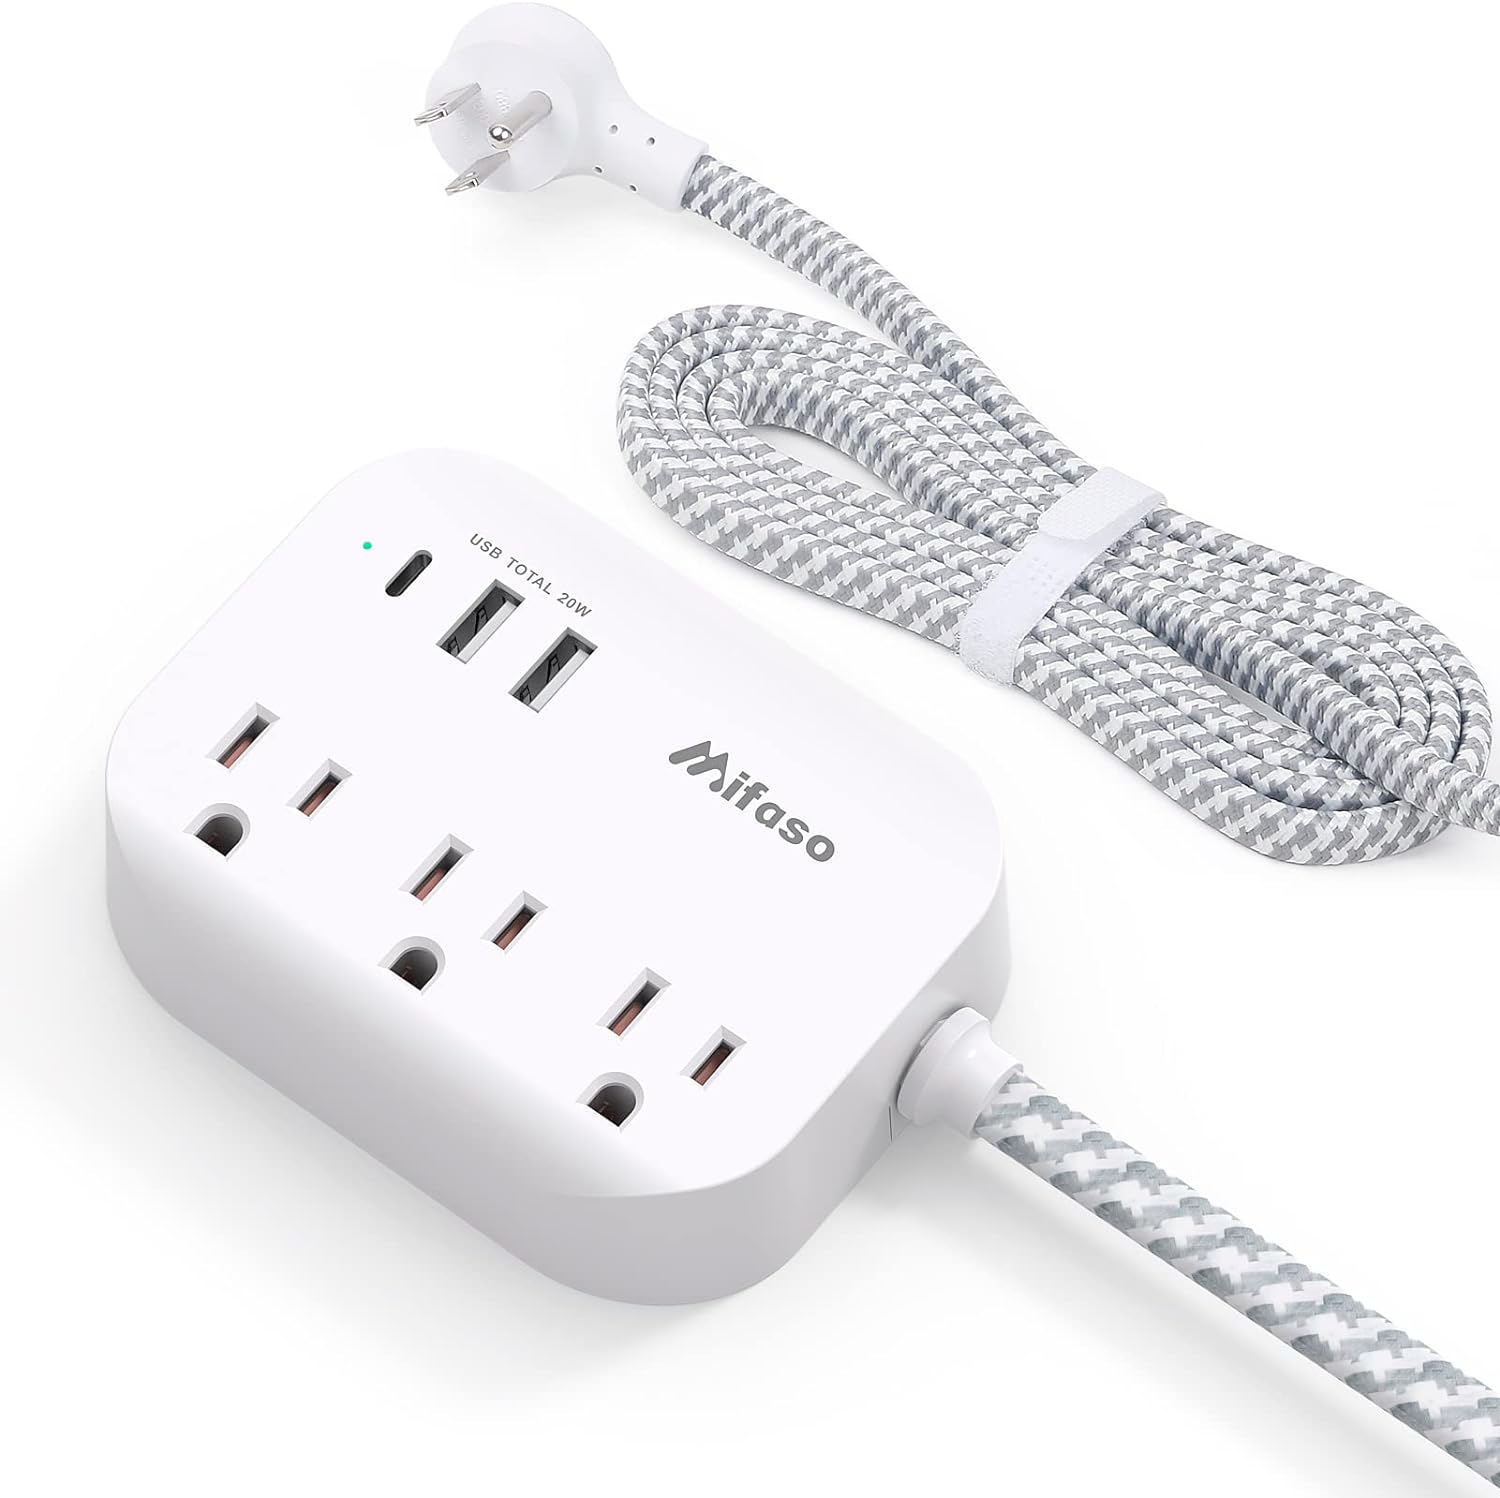 Cruise Essentials - Flat Plug Power Strip with 3 Outlets 3 USB Ports(1 USB C Poiwer Delivery 20W), 5ft Braided Extension Cord, Compact for Cruise Ship, Travel, Home and Dorm